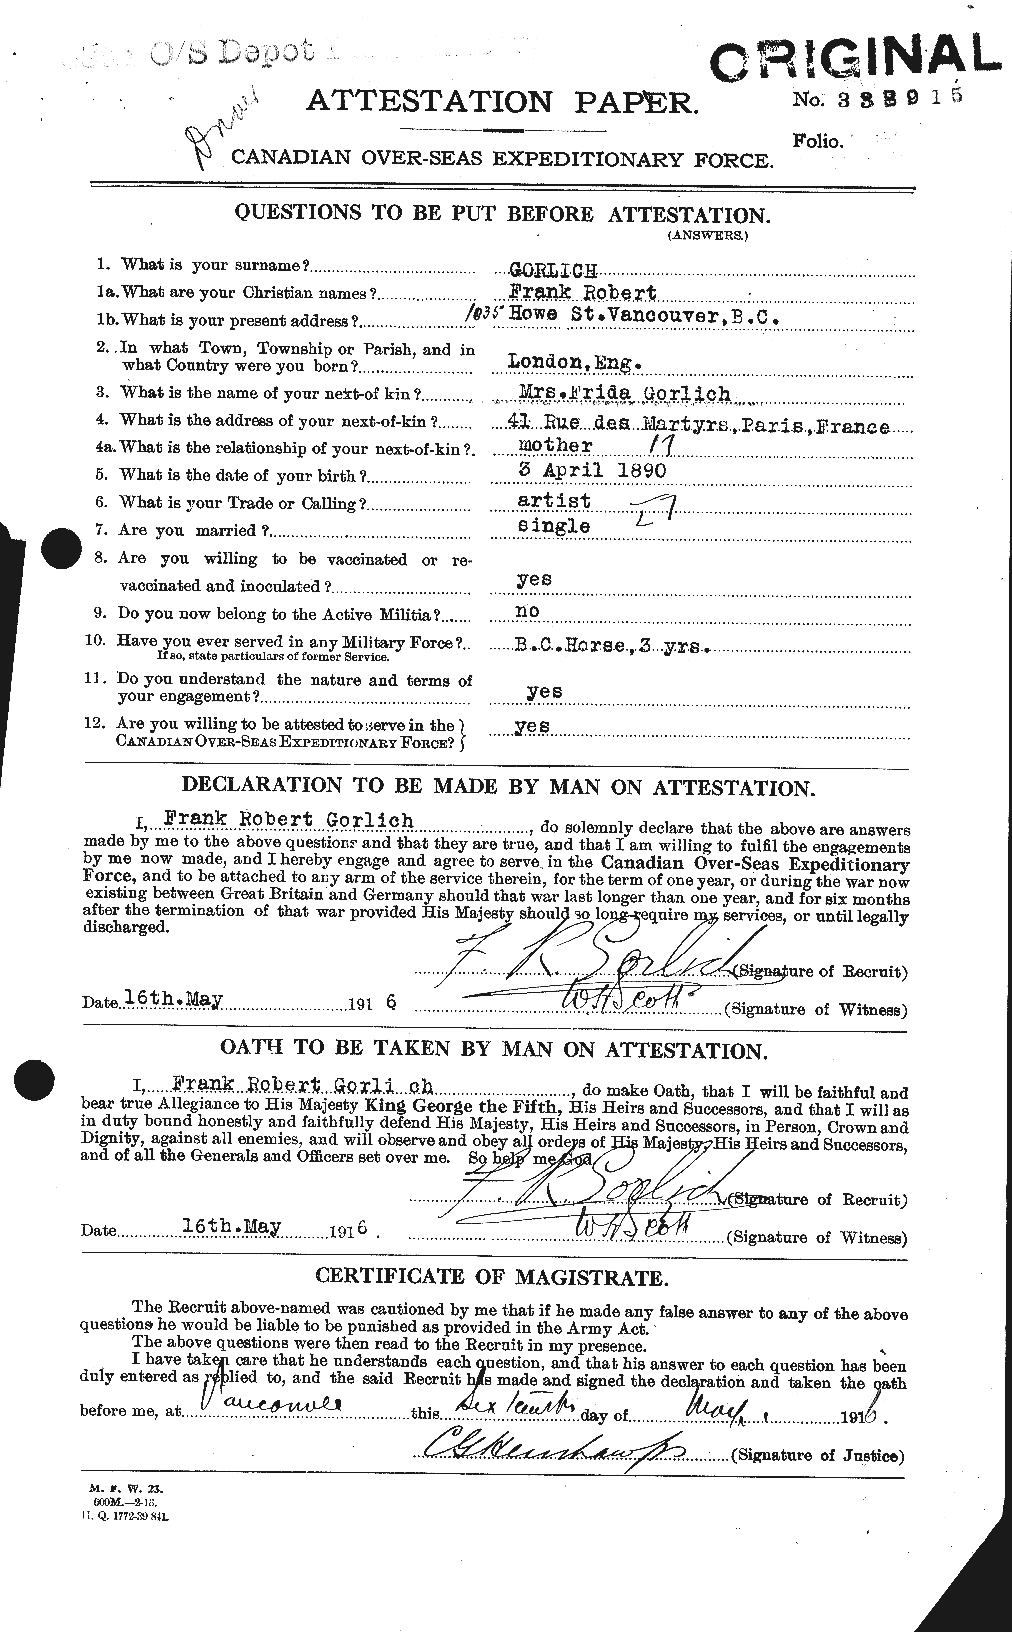 Personnel Records of the First World War - CEF 356764a